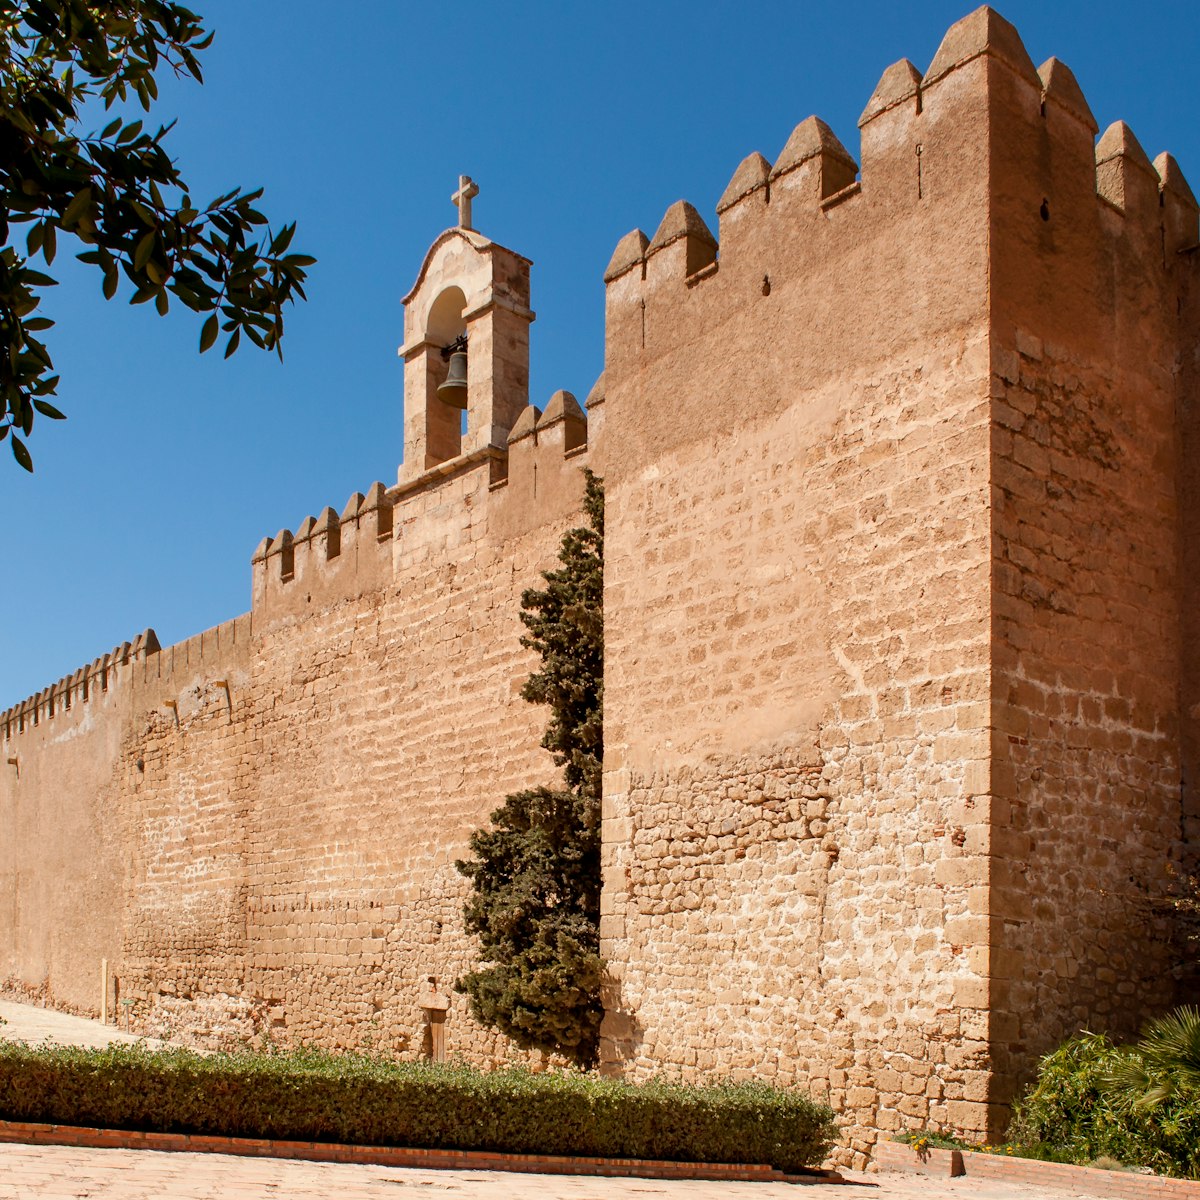 The sail wall with its bell, which separates the first and second enclosures of the fortress in Alcazaba, Almeria, Spain.